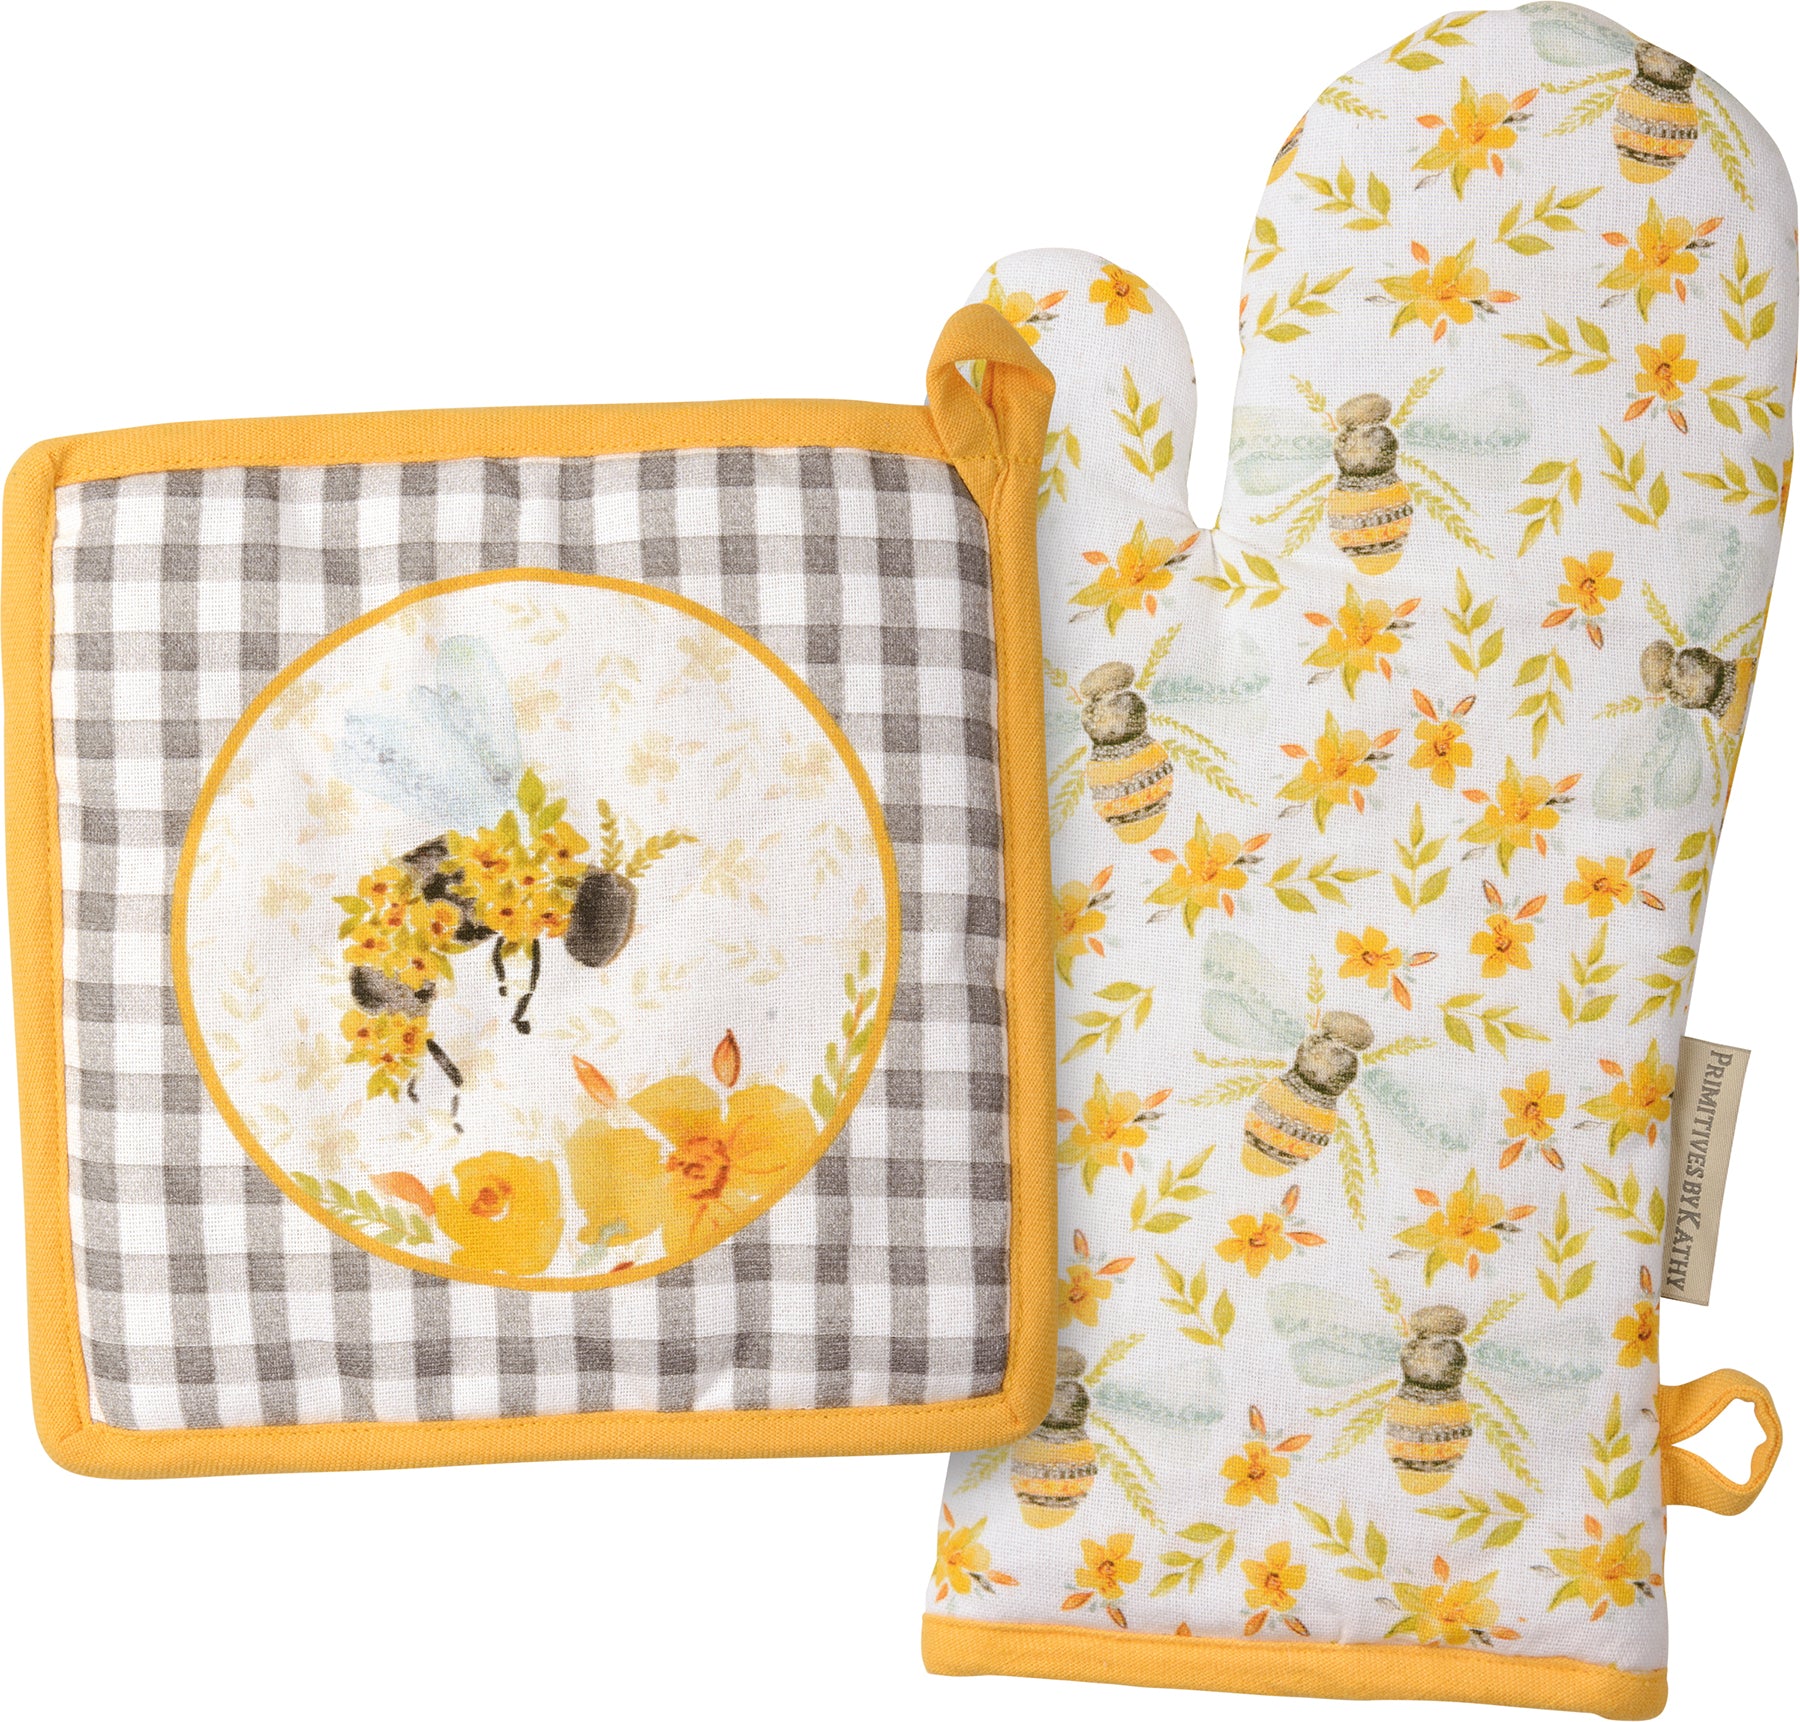  Funny Bees Honey Left-Hand Oven Mitt and Pot Holders Sets of 2,  Yellow Beehive BBQ Silicone Gloves of Durable, Cooking Heat Resistant Pads  Mats : Patio, Lawn & Garden